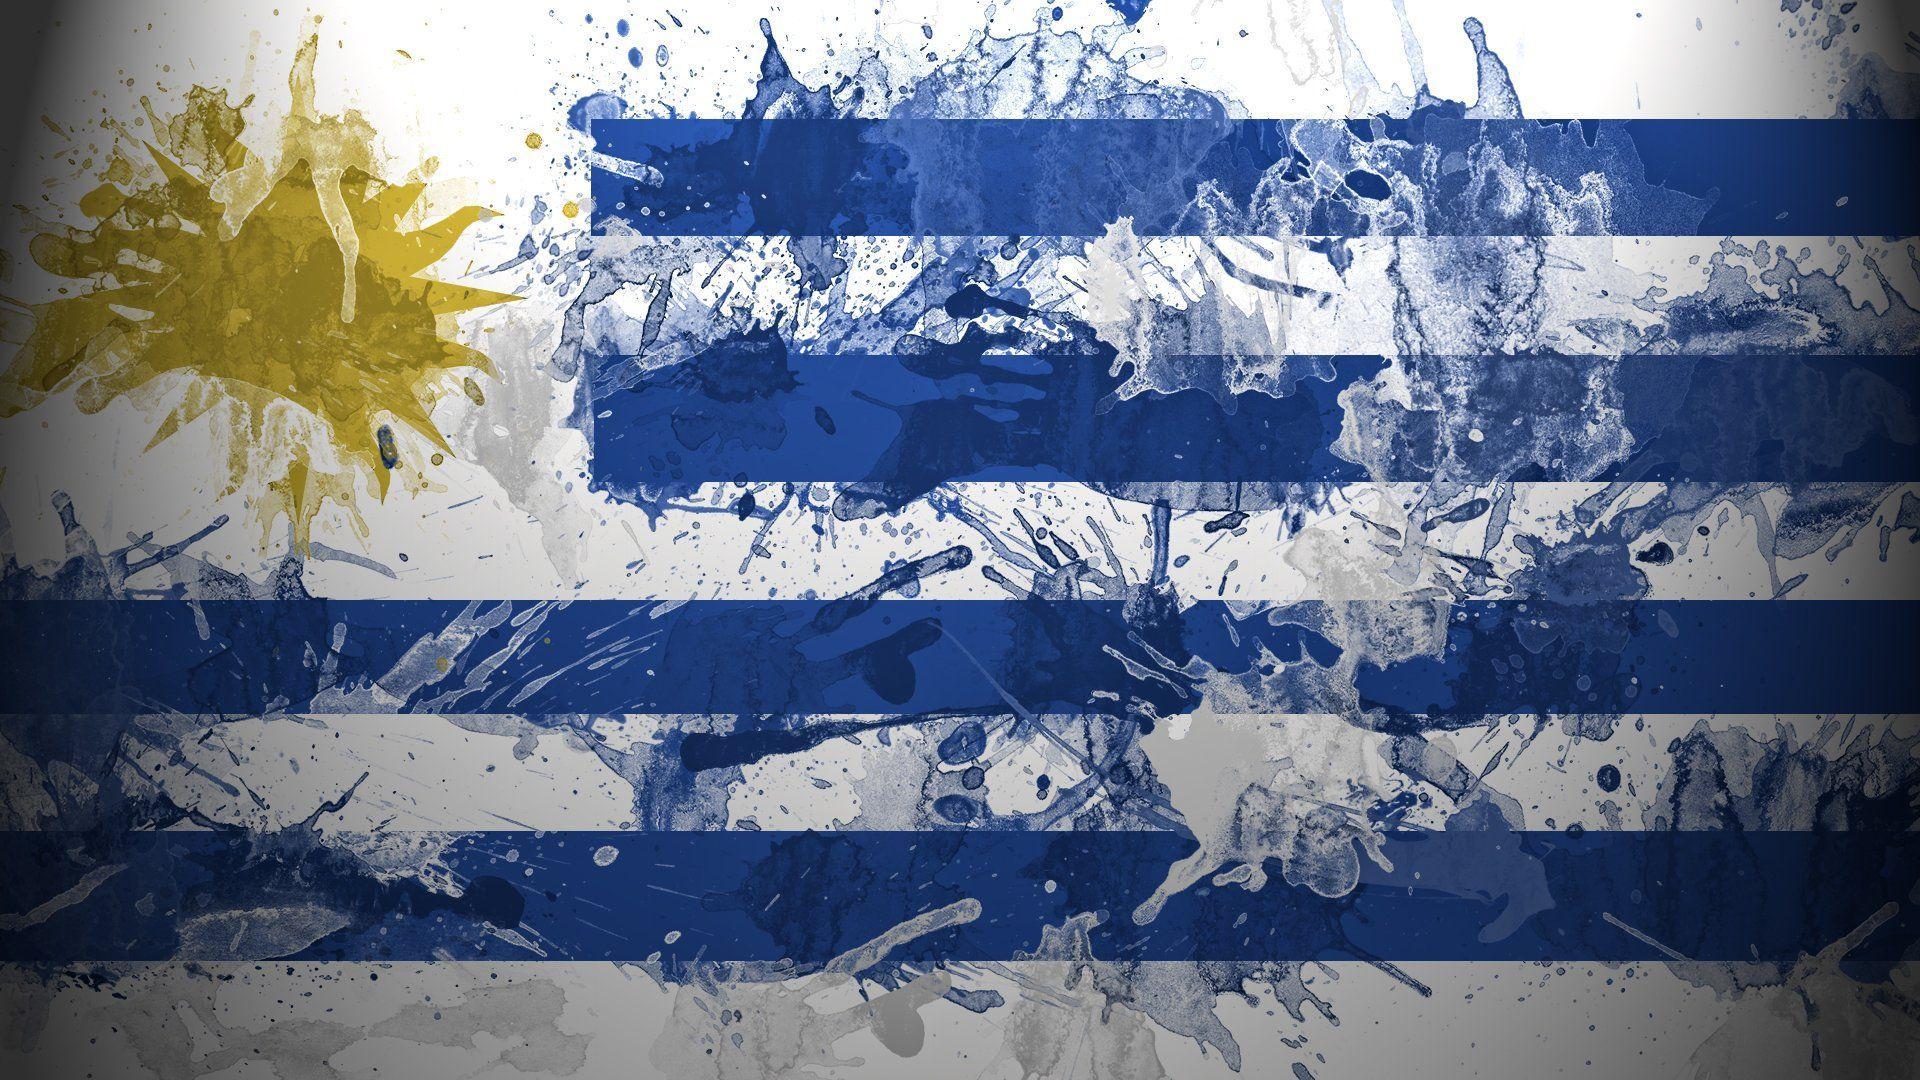 Uruguay Wallpaper and Picture Collection